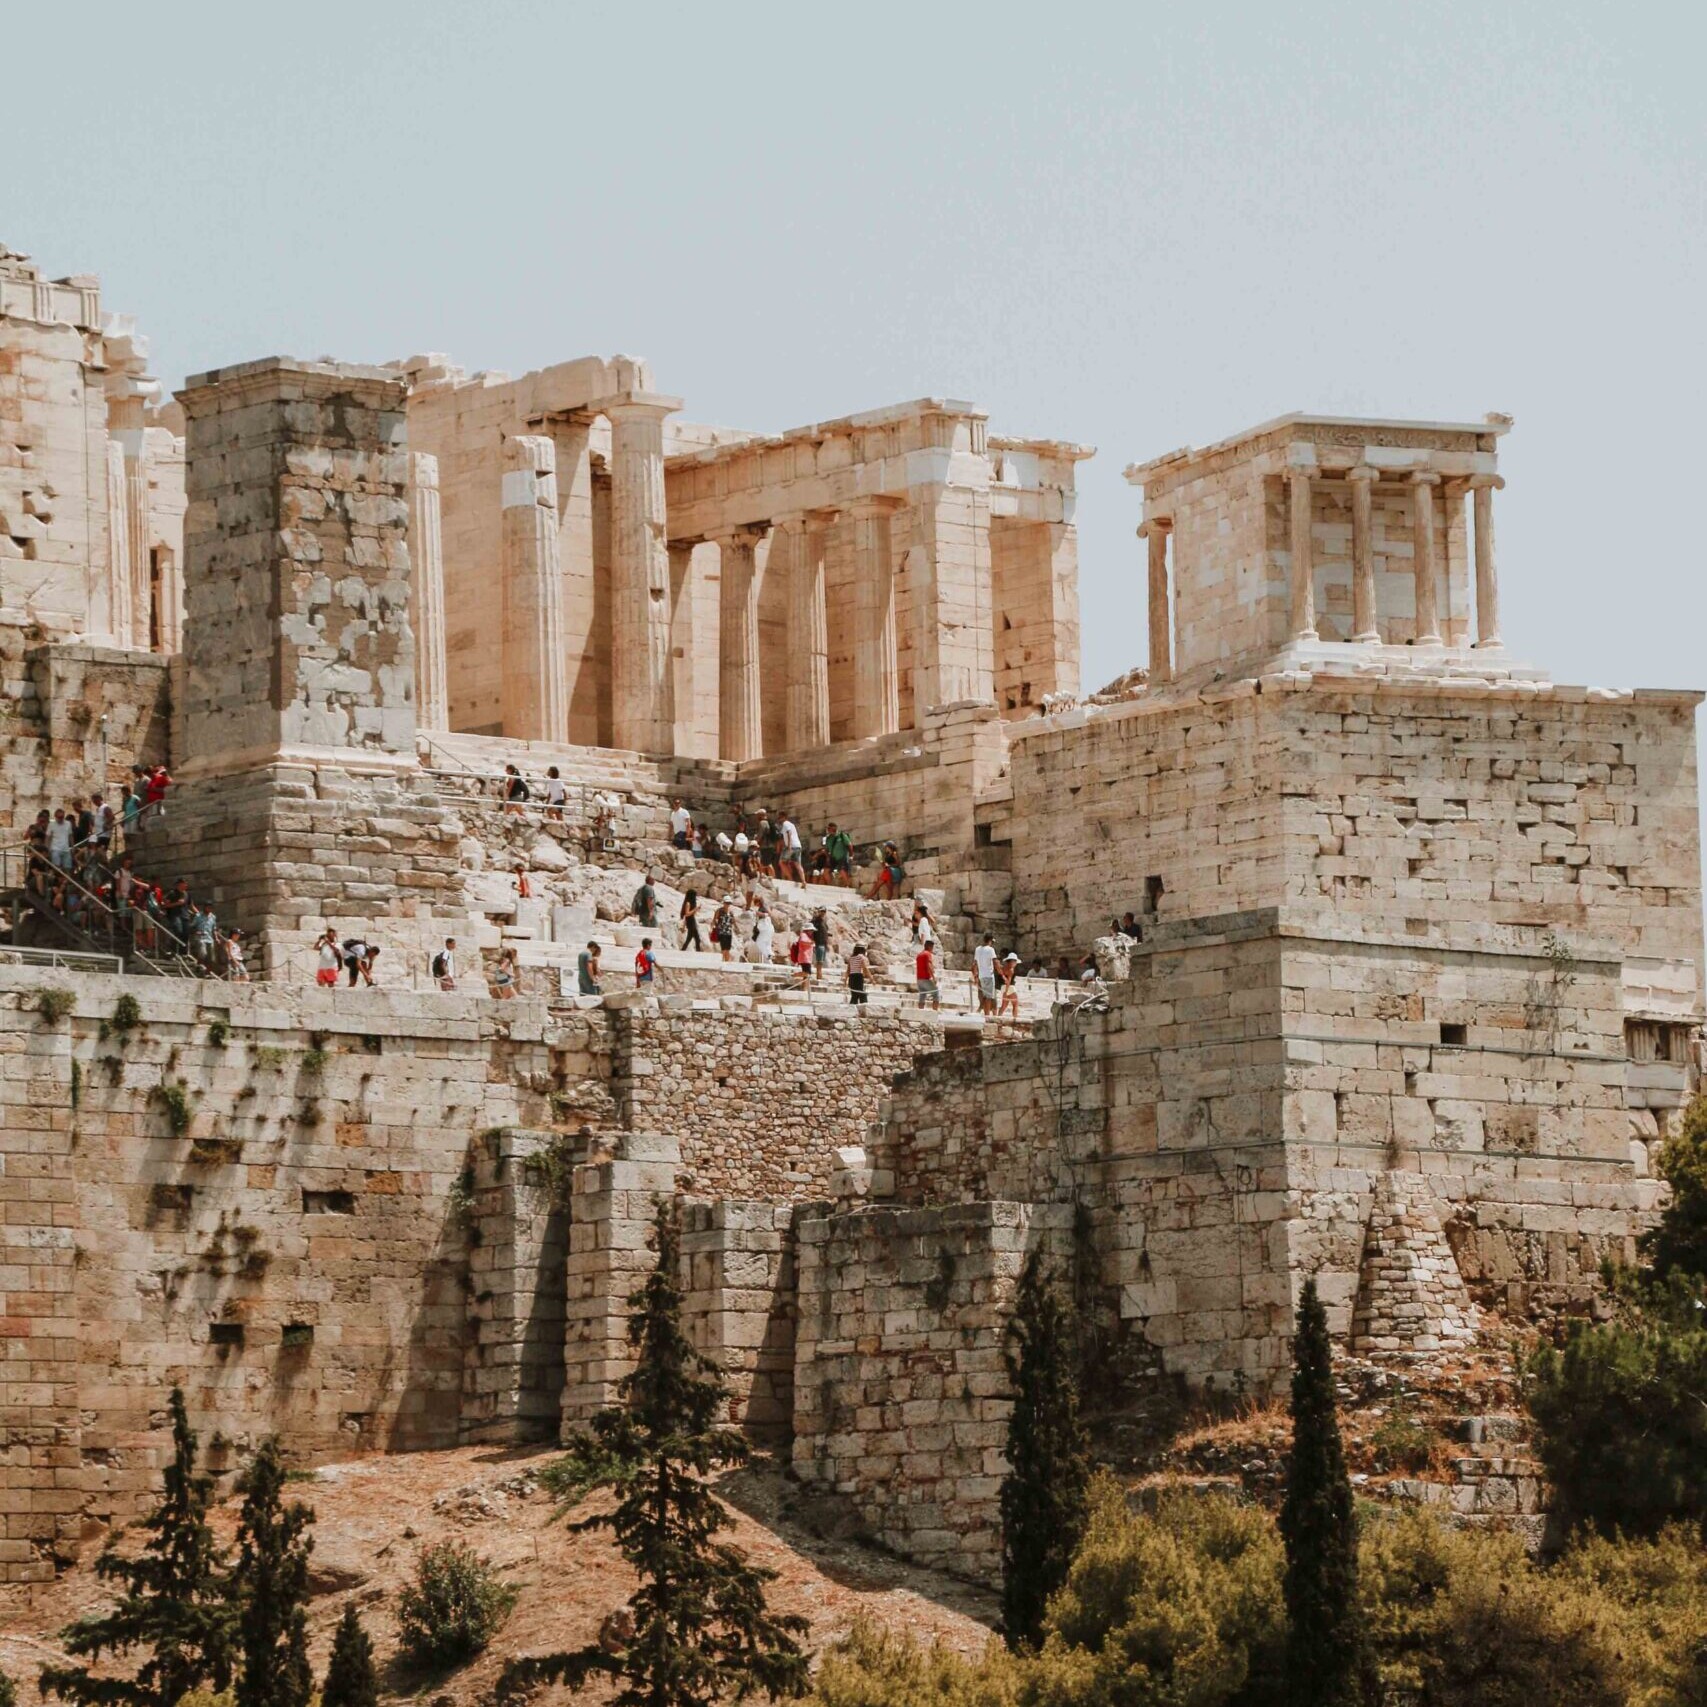 Acropolis seen in Athens 1 day itinerary